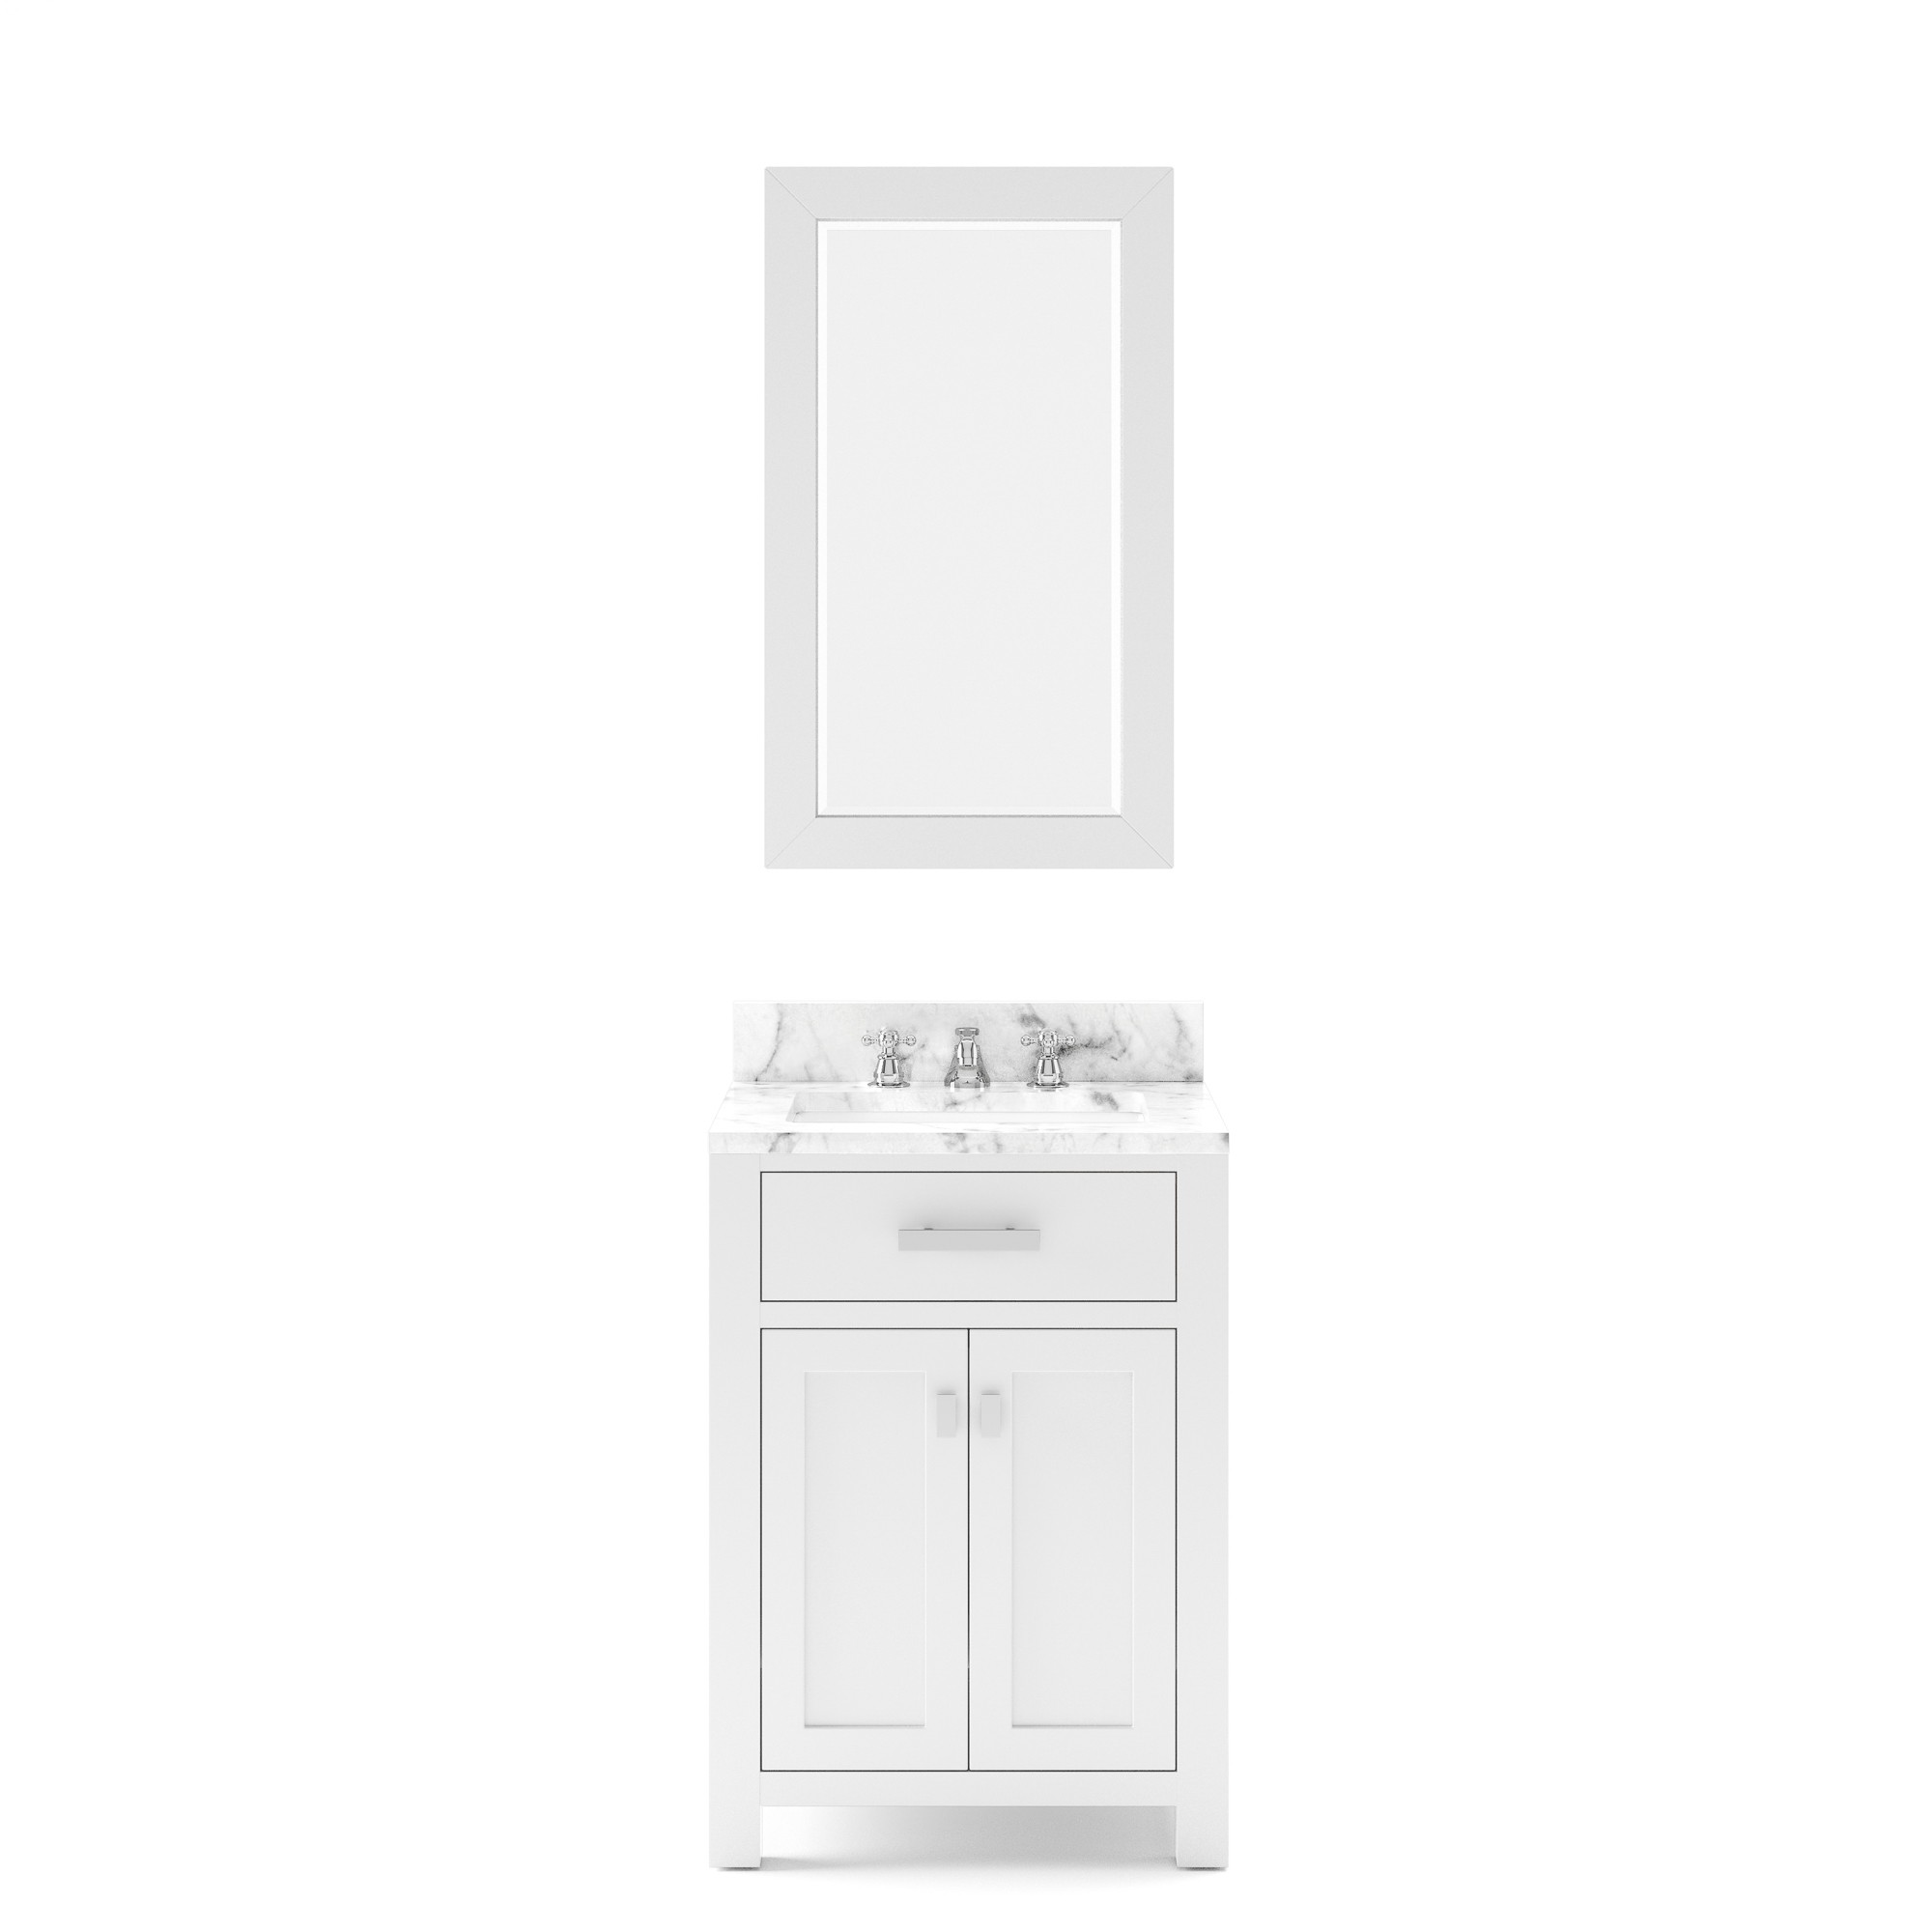 WATER-CREATION MS24CW01PW-R21BX0901 MADISON 24 INCH PURE WHITE SINGLE SINK BATHROOM VANITY WITH MATCHING FRAMED MIRROR AND FAUCET